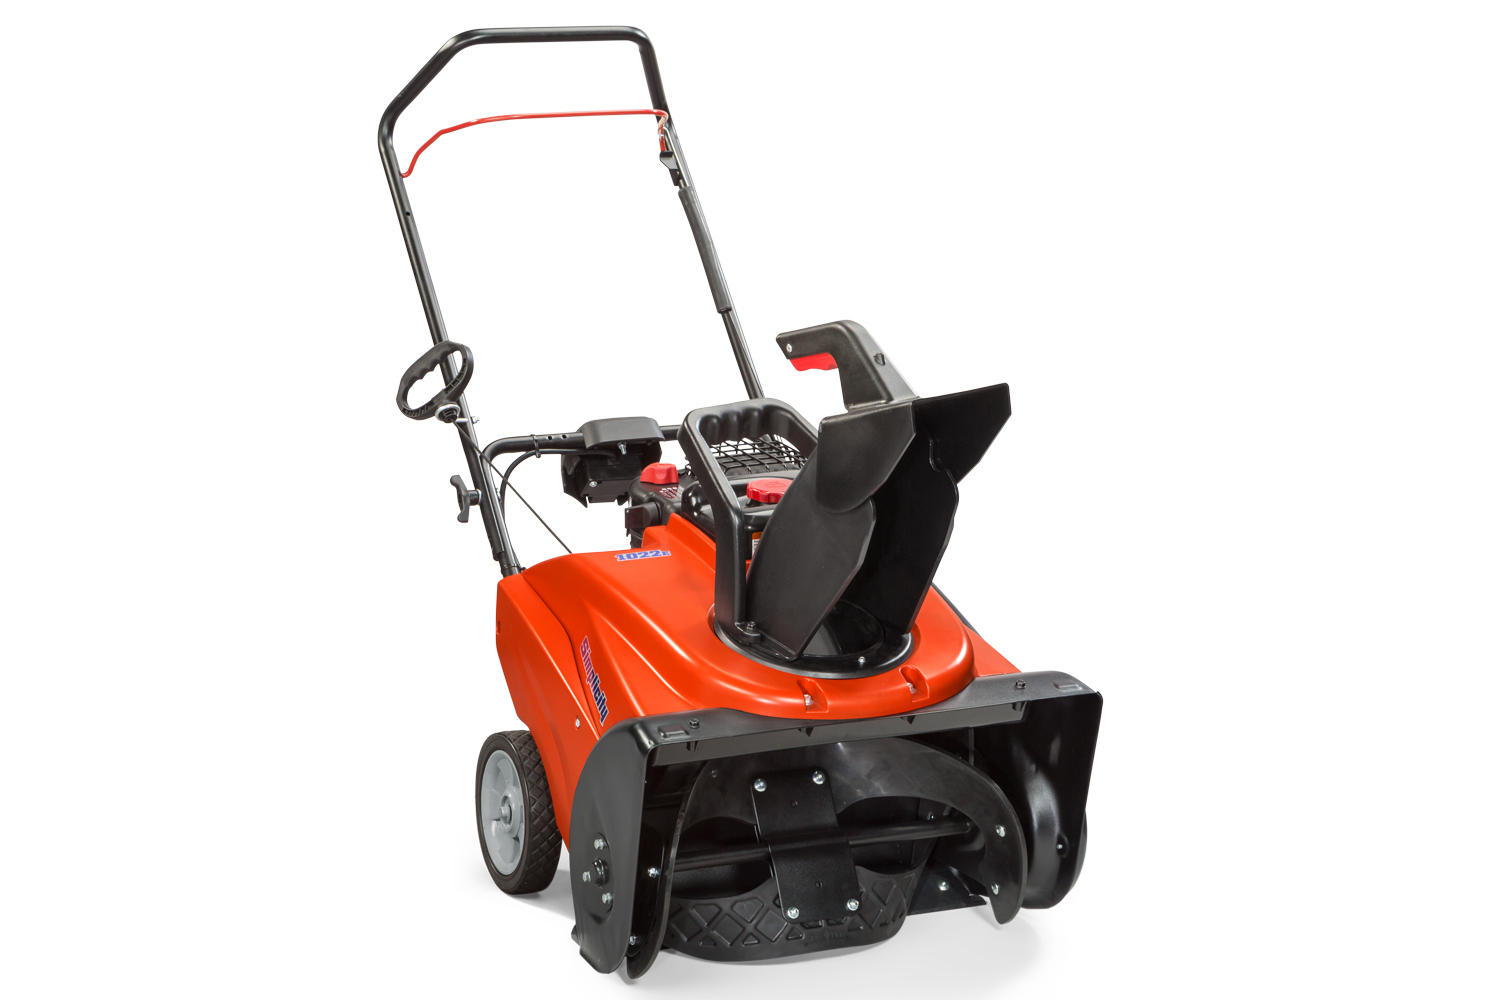 SIMPLICITY SINGLE-STAGE SNOW BLOWER 1022E<br/>*Model shown in image may vary.